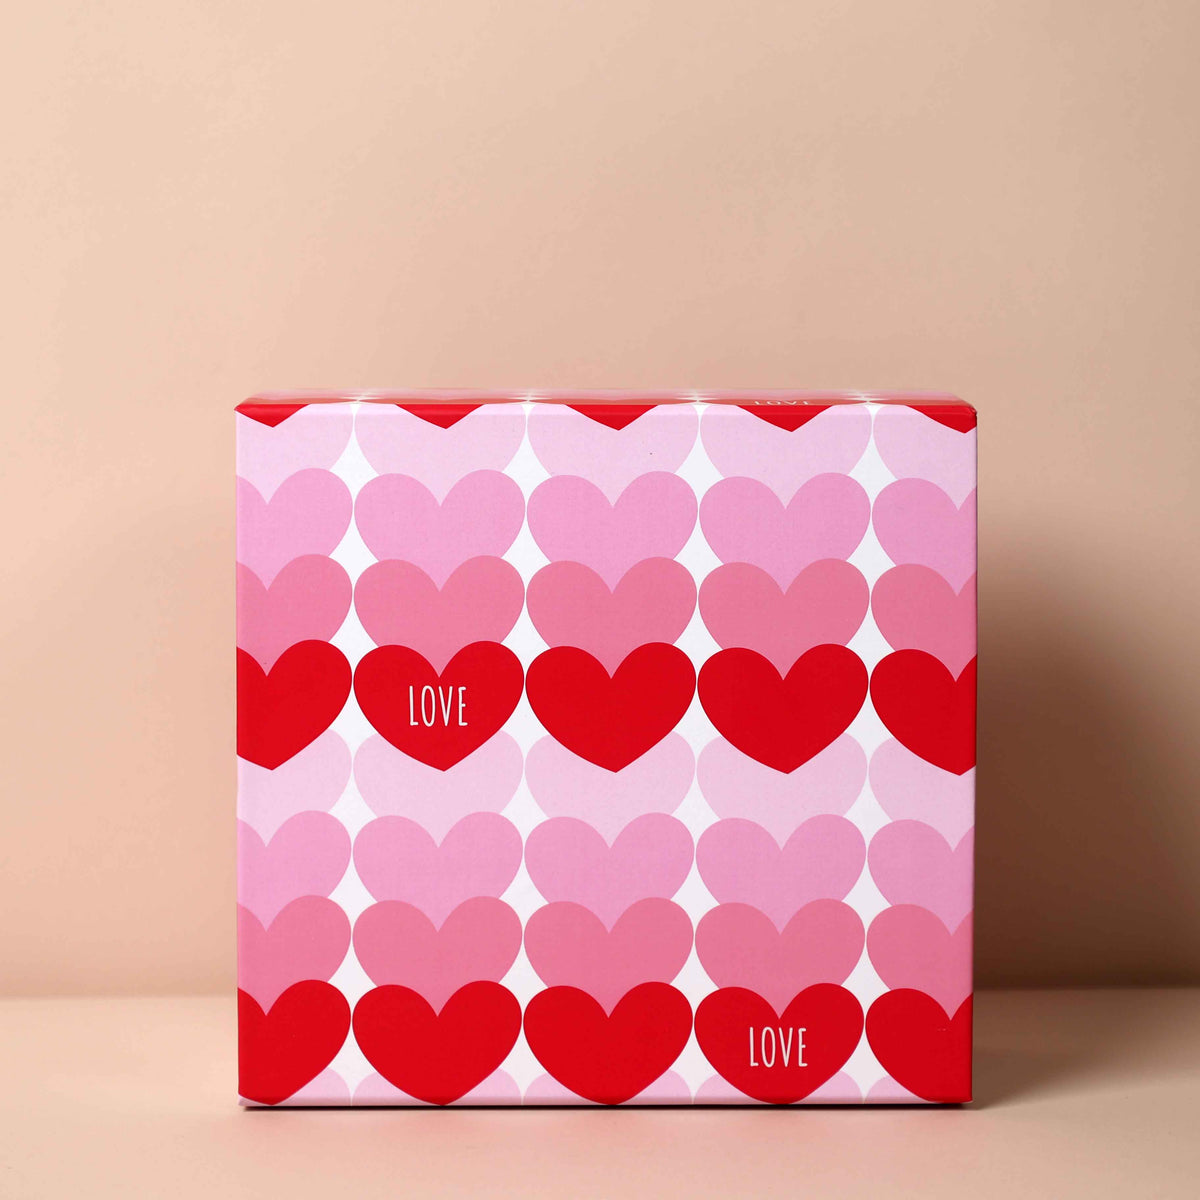 Cream Paper Magnetic Packaging Box